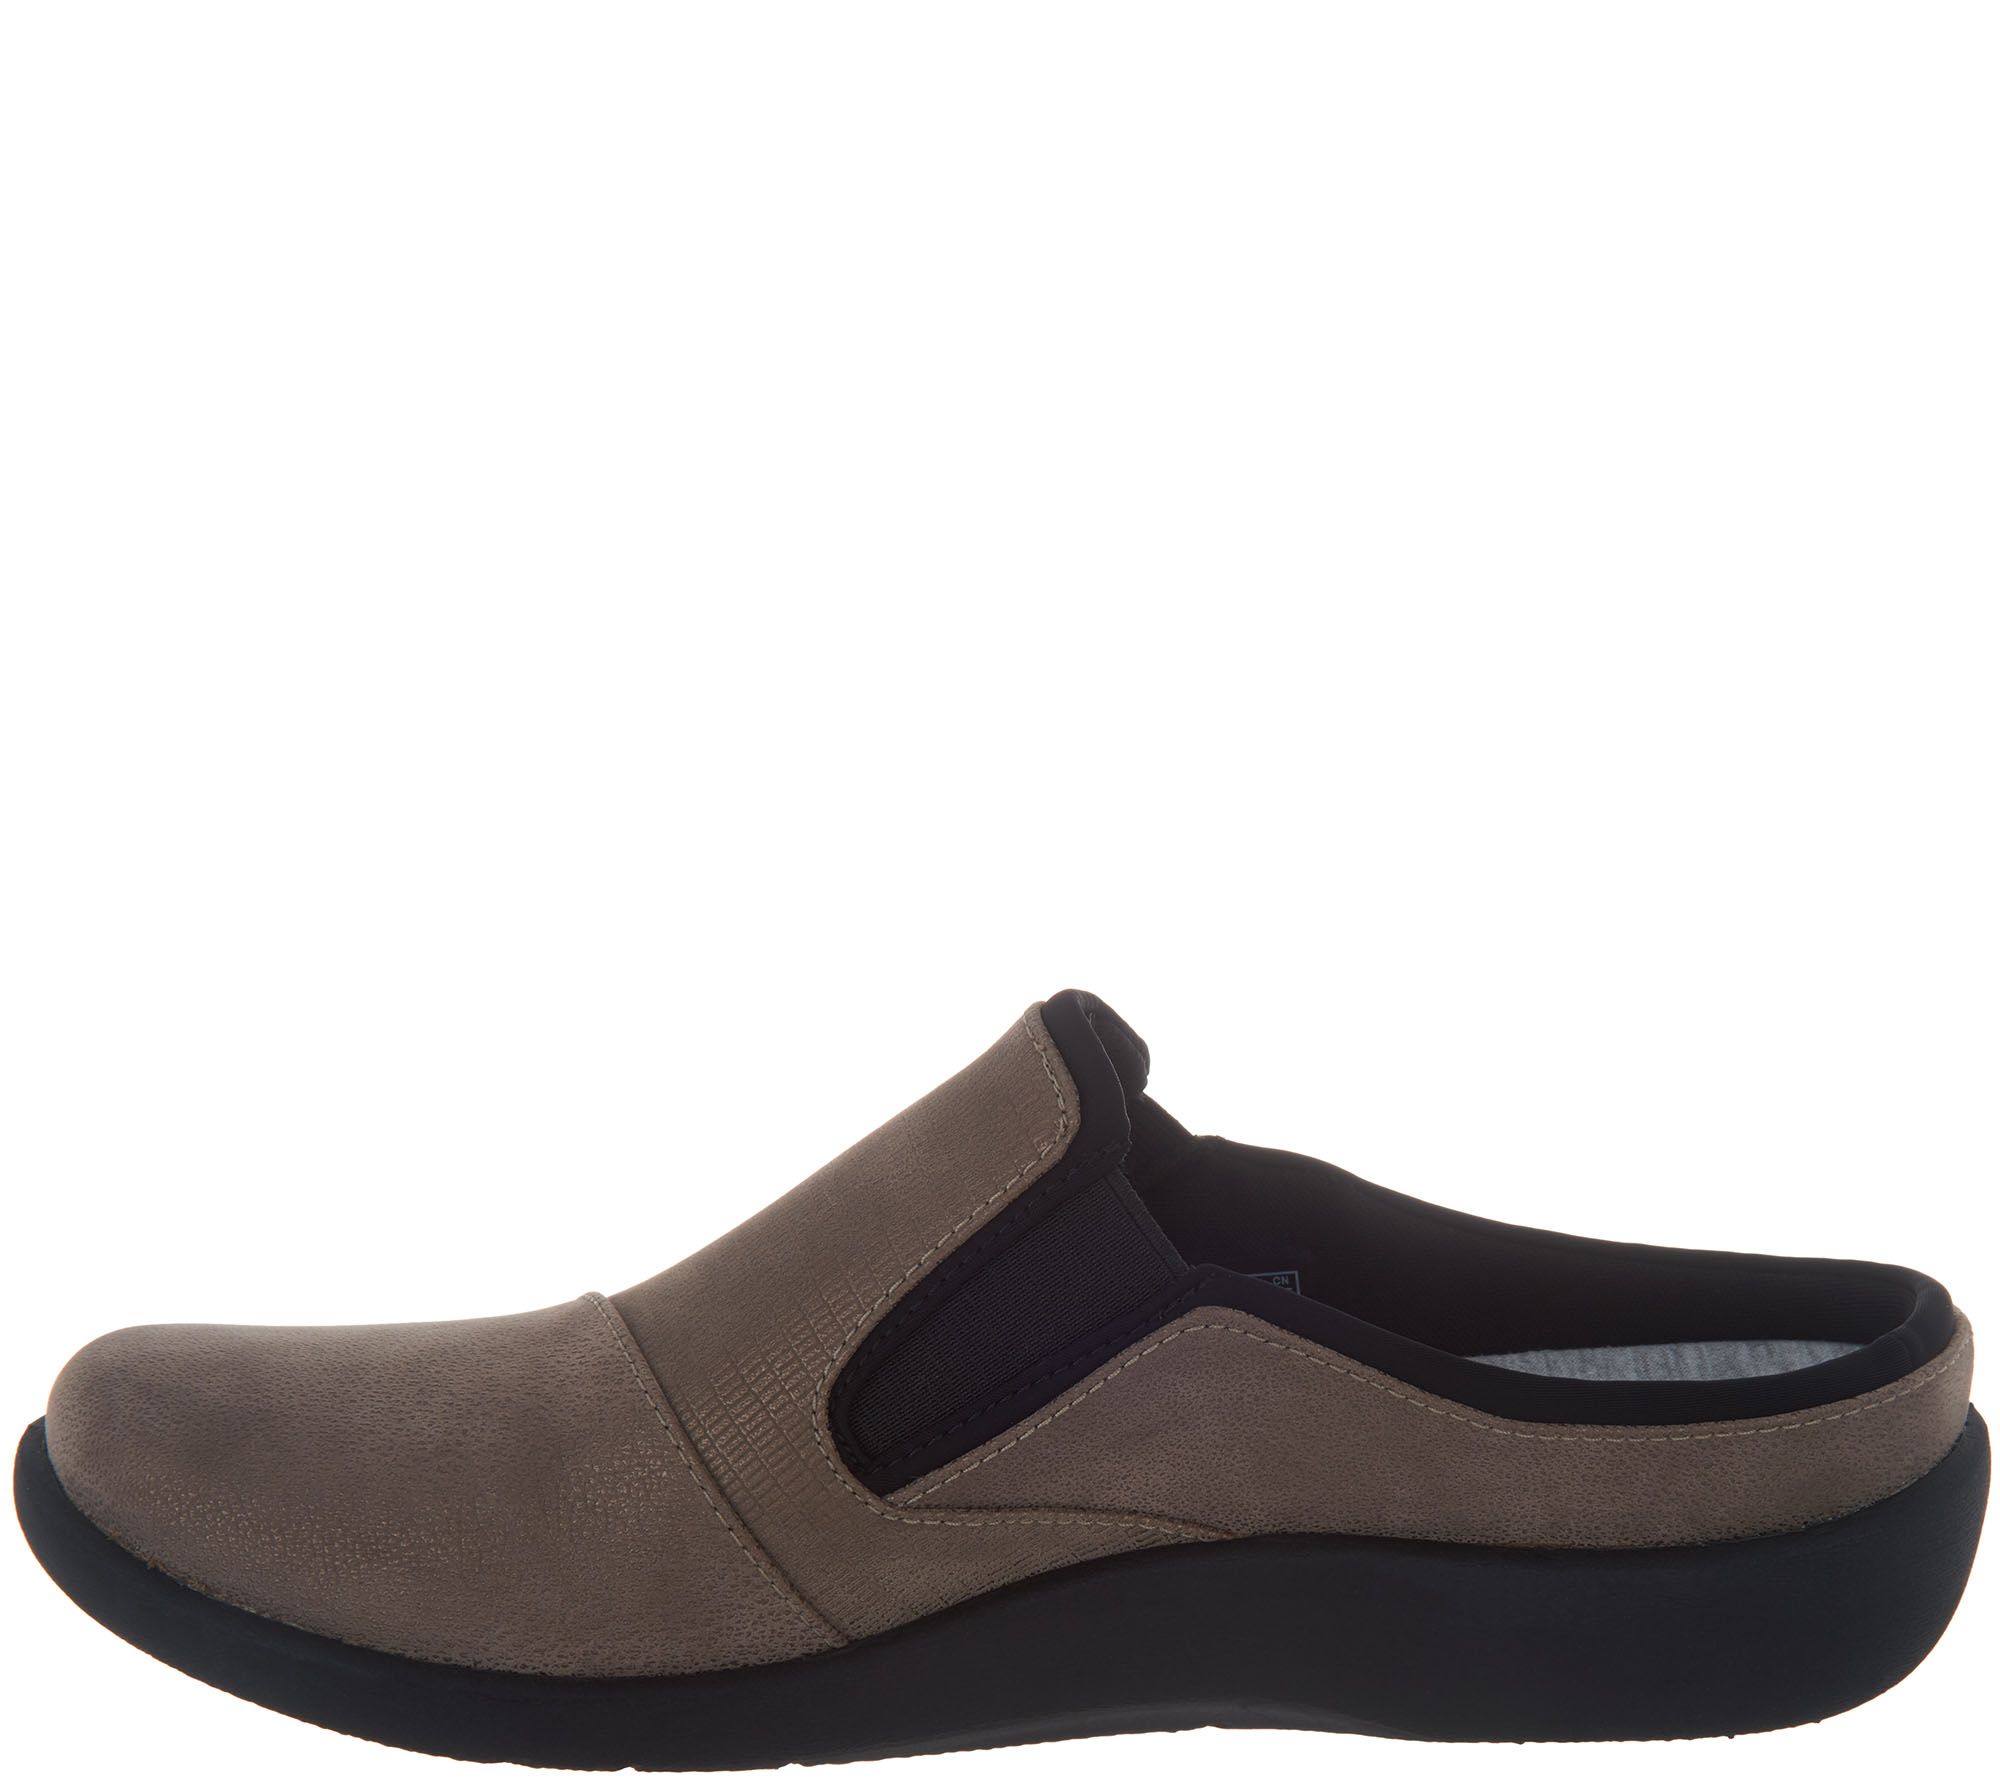 Clarks Cloudsteppers Slip-On Clogs - Sillian Free - QVC.com